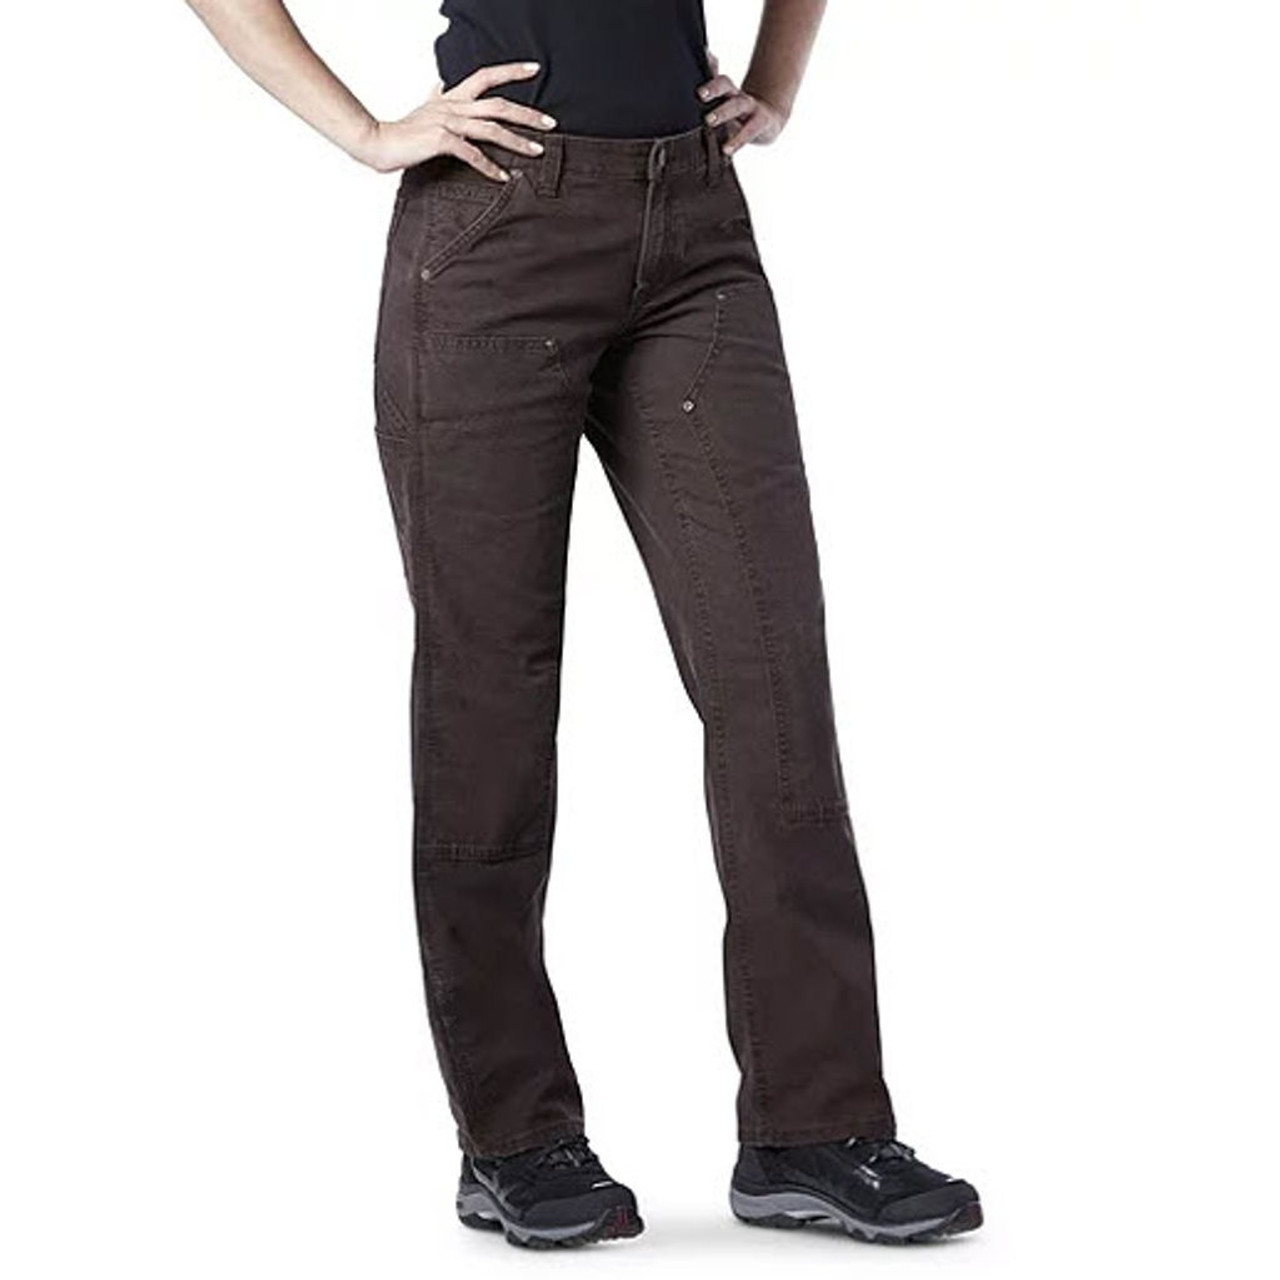 Girls' Carhartt TOUGH COTTON Fitted Utility Leggings